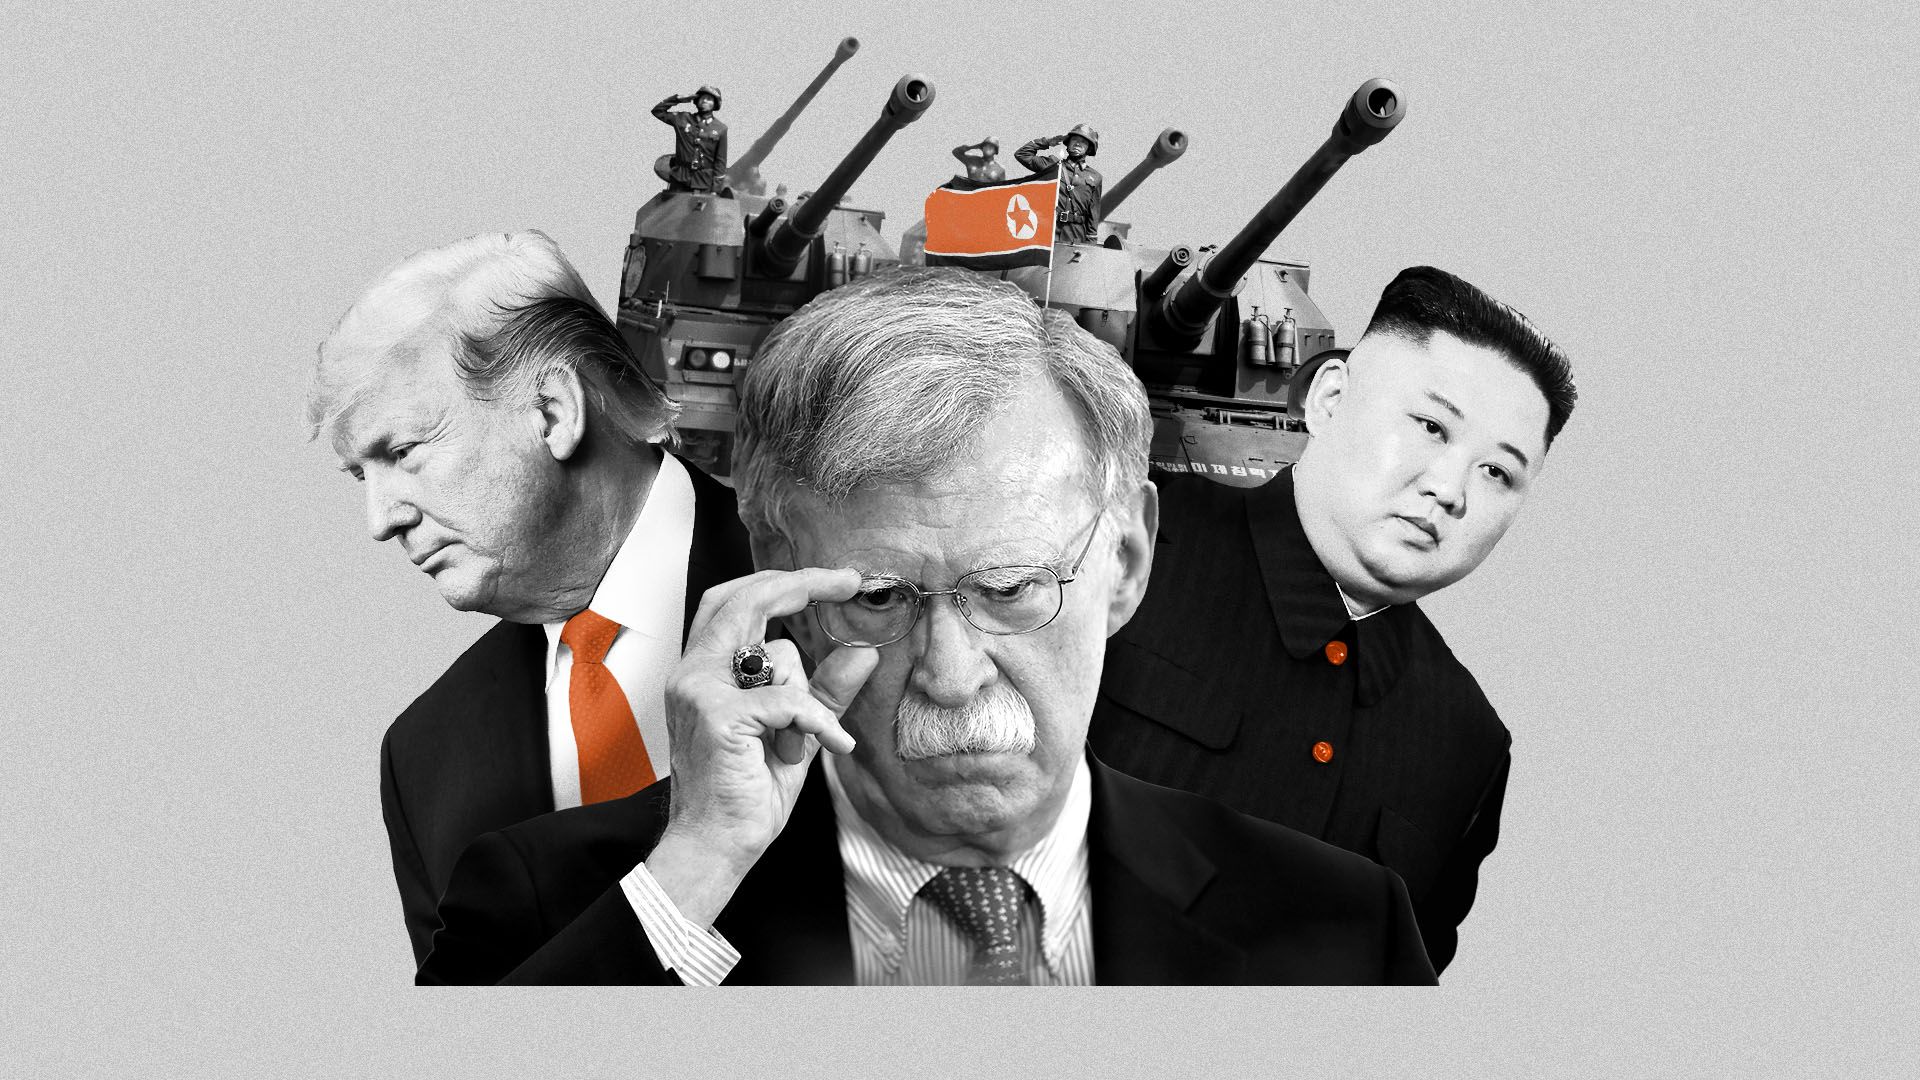 Photo illustration of John Bolton, President Trump, Kim Jong Un, and a collection of tanks from a North Korean military parade.